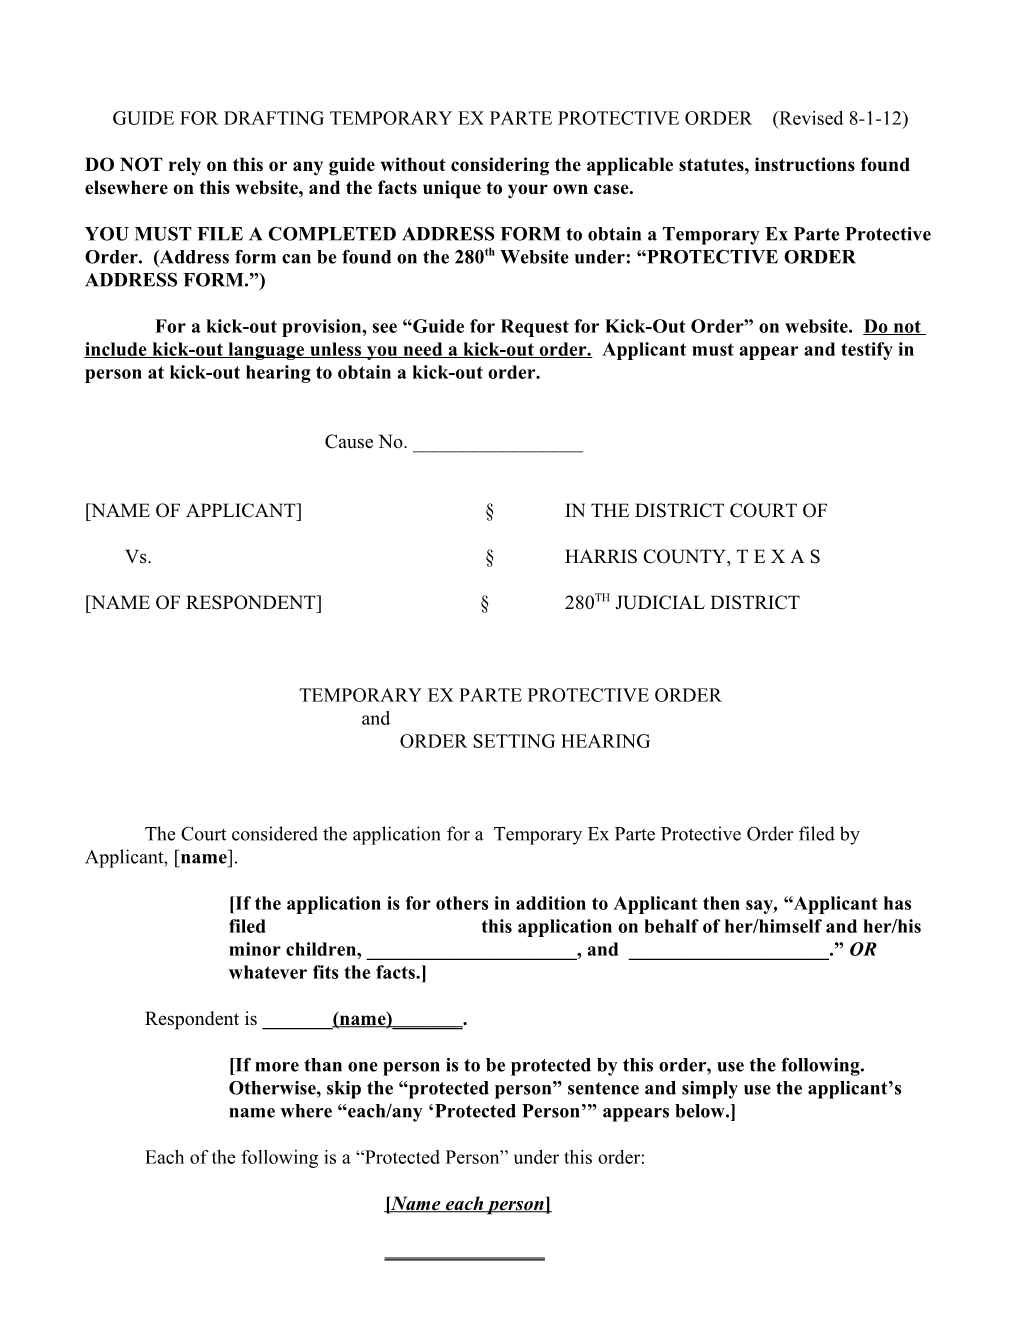 GUIDE for DRAFTING TEMPORARY EX PARTE PROTECTIVE ORDER (Revised 8-1-12)